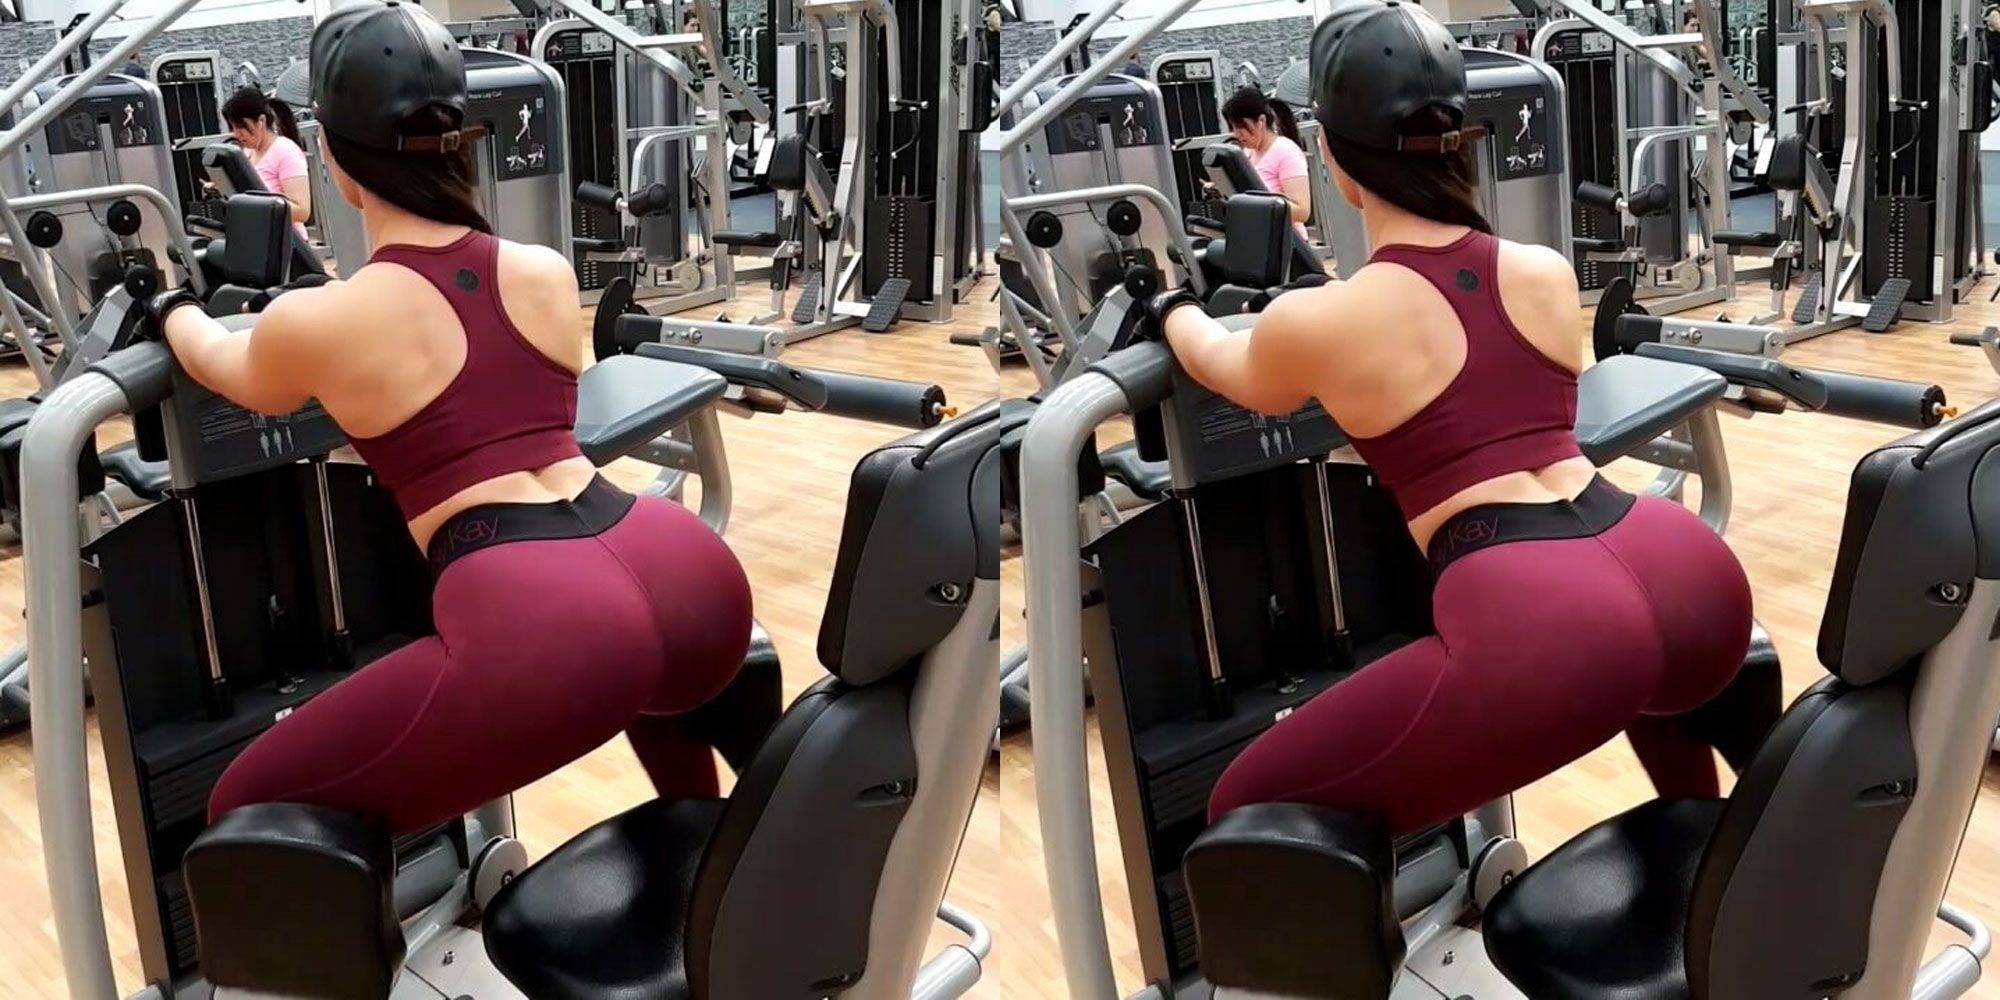 Leg Bangers To Try During Your Next Leg Day